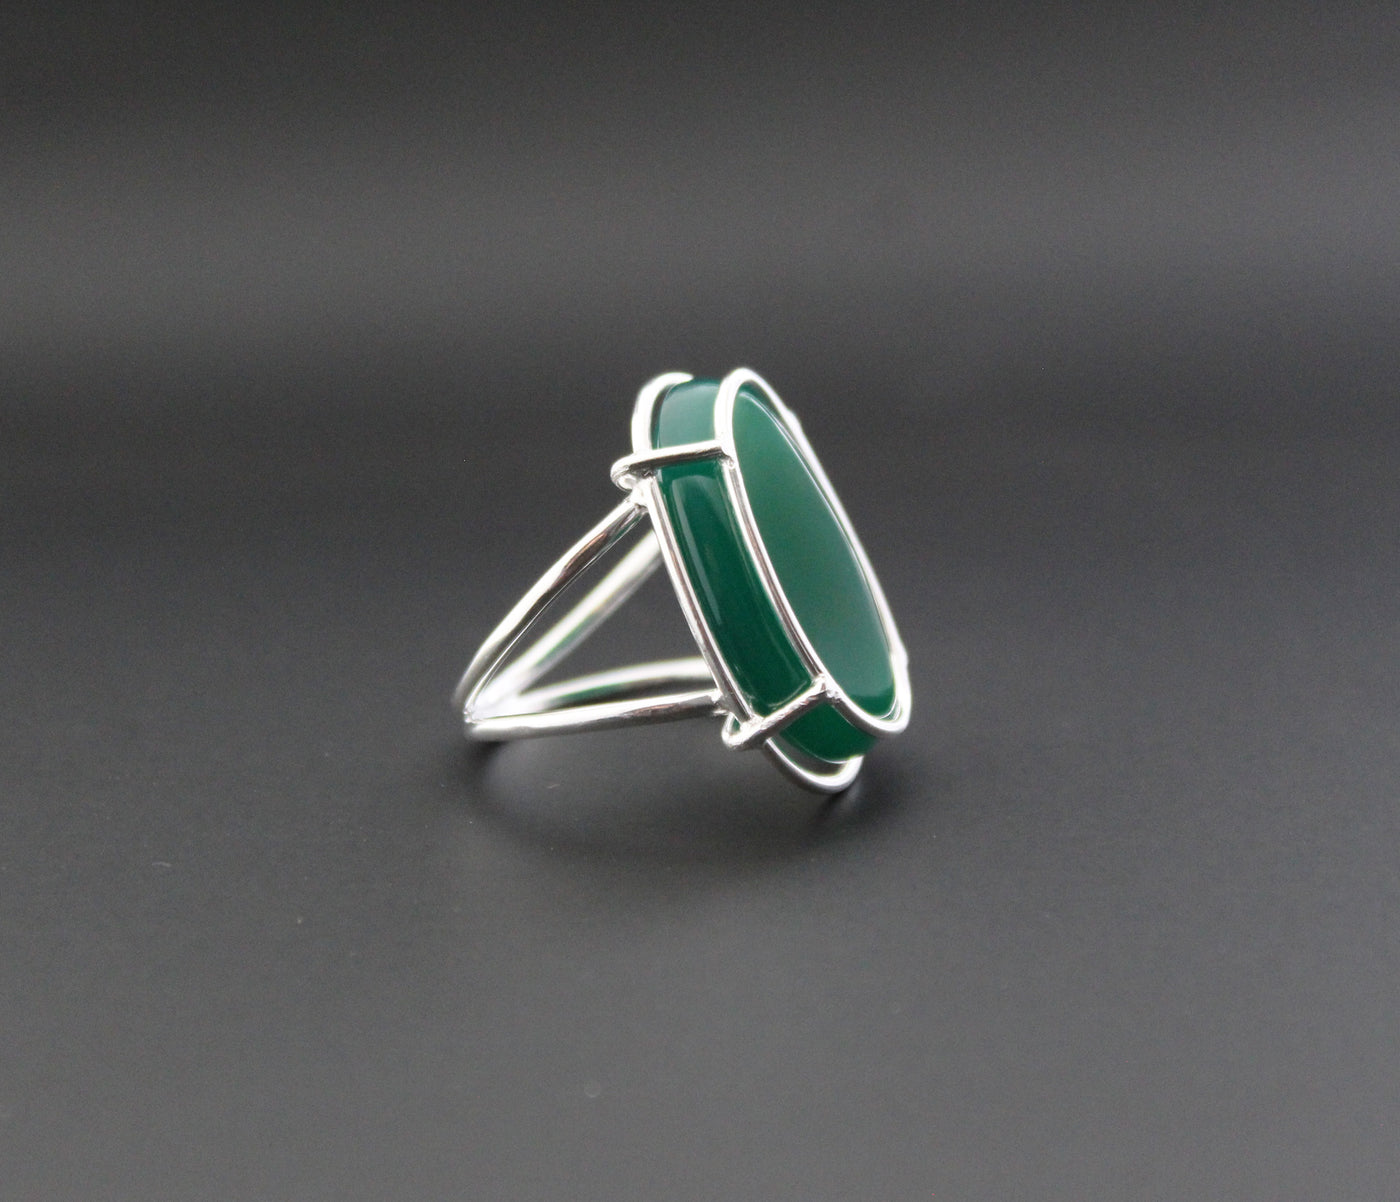 Natural Green Onyx Ring, Handmade 925 Silver Ring, Green Onyx Designer Ring, December Birthstone, Promise Ring, Hand Crafted Bohemian Ring